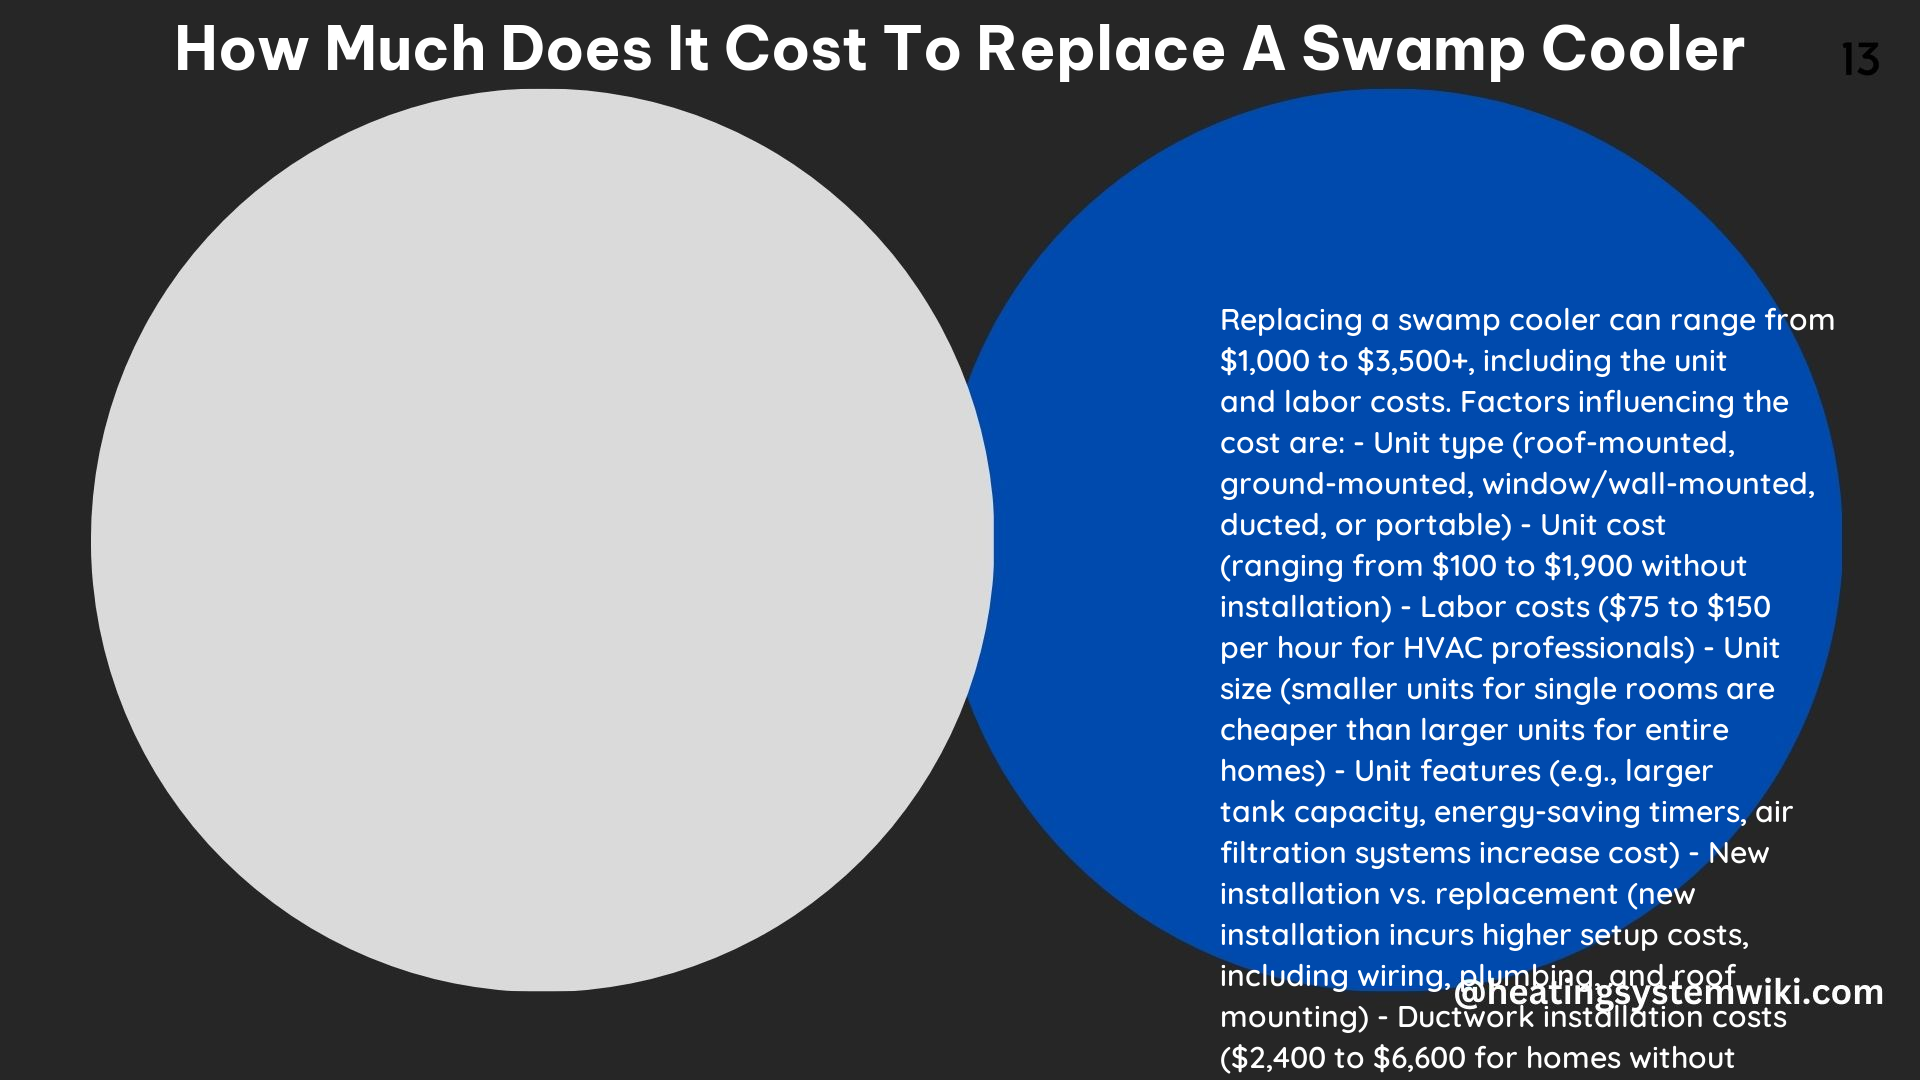 How Much Does It Cost to Replace a Swamp Cooler